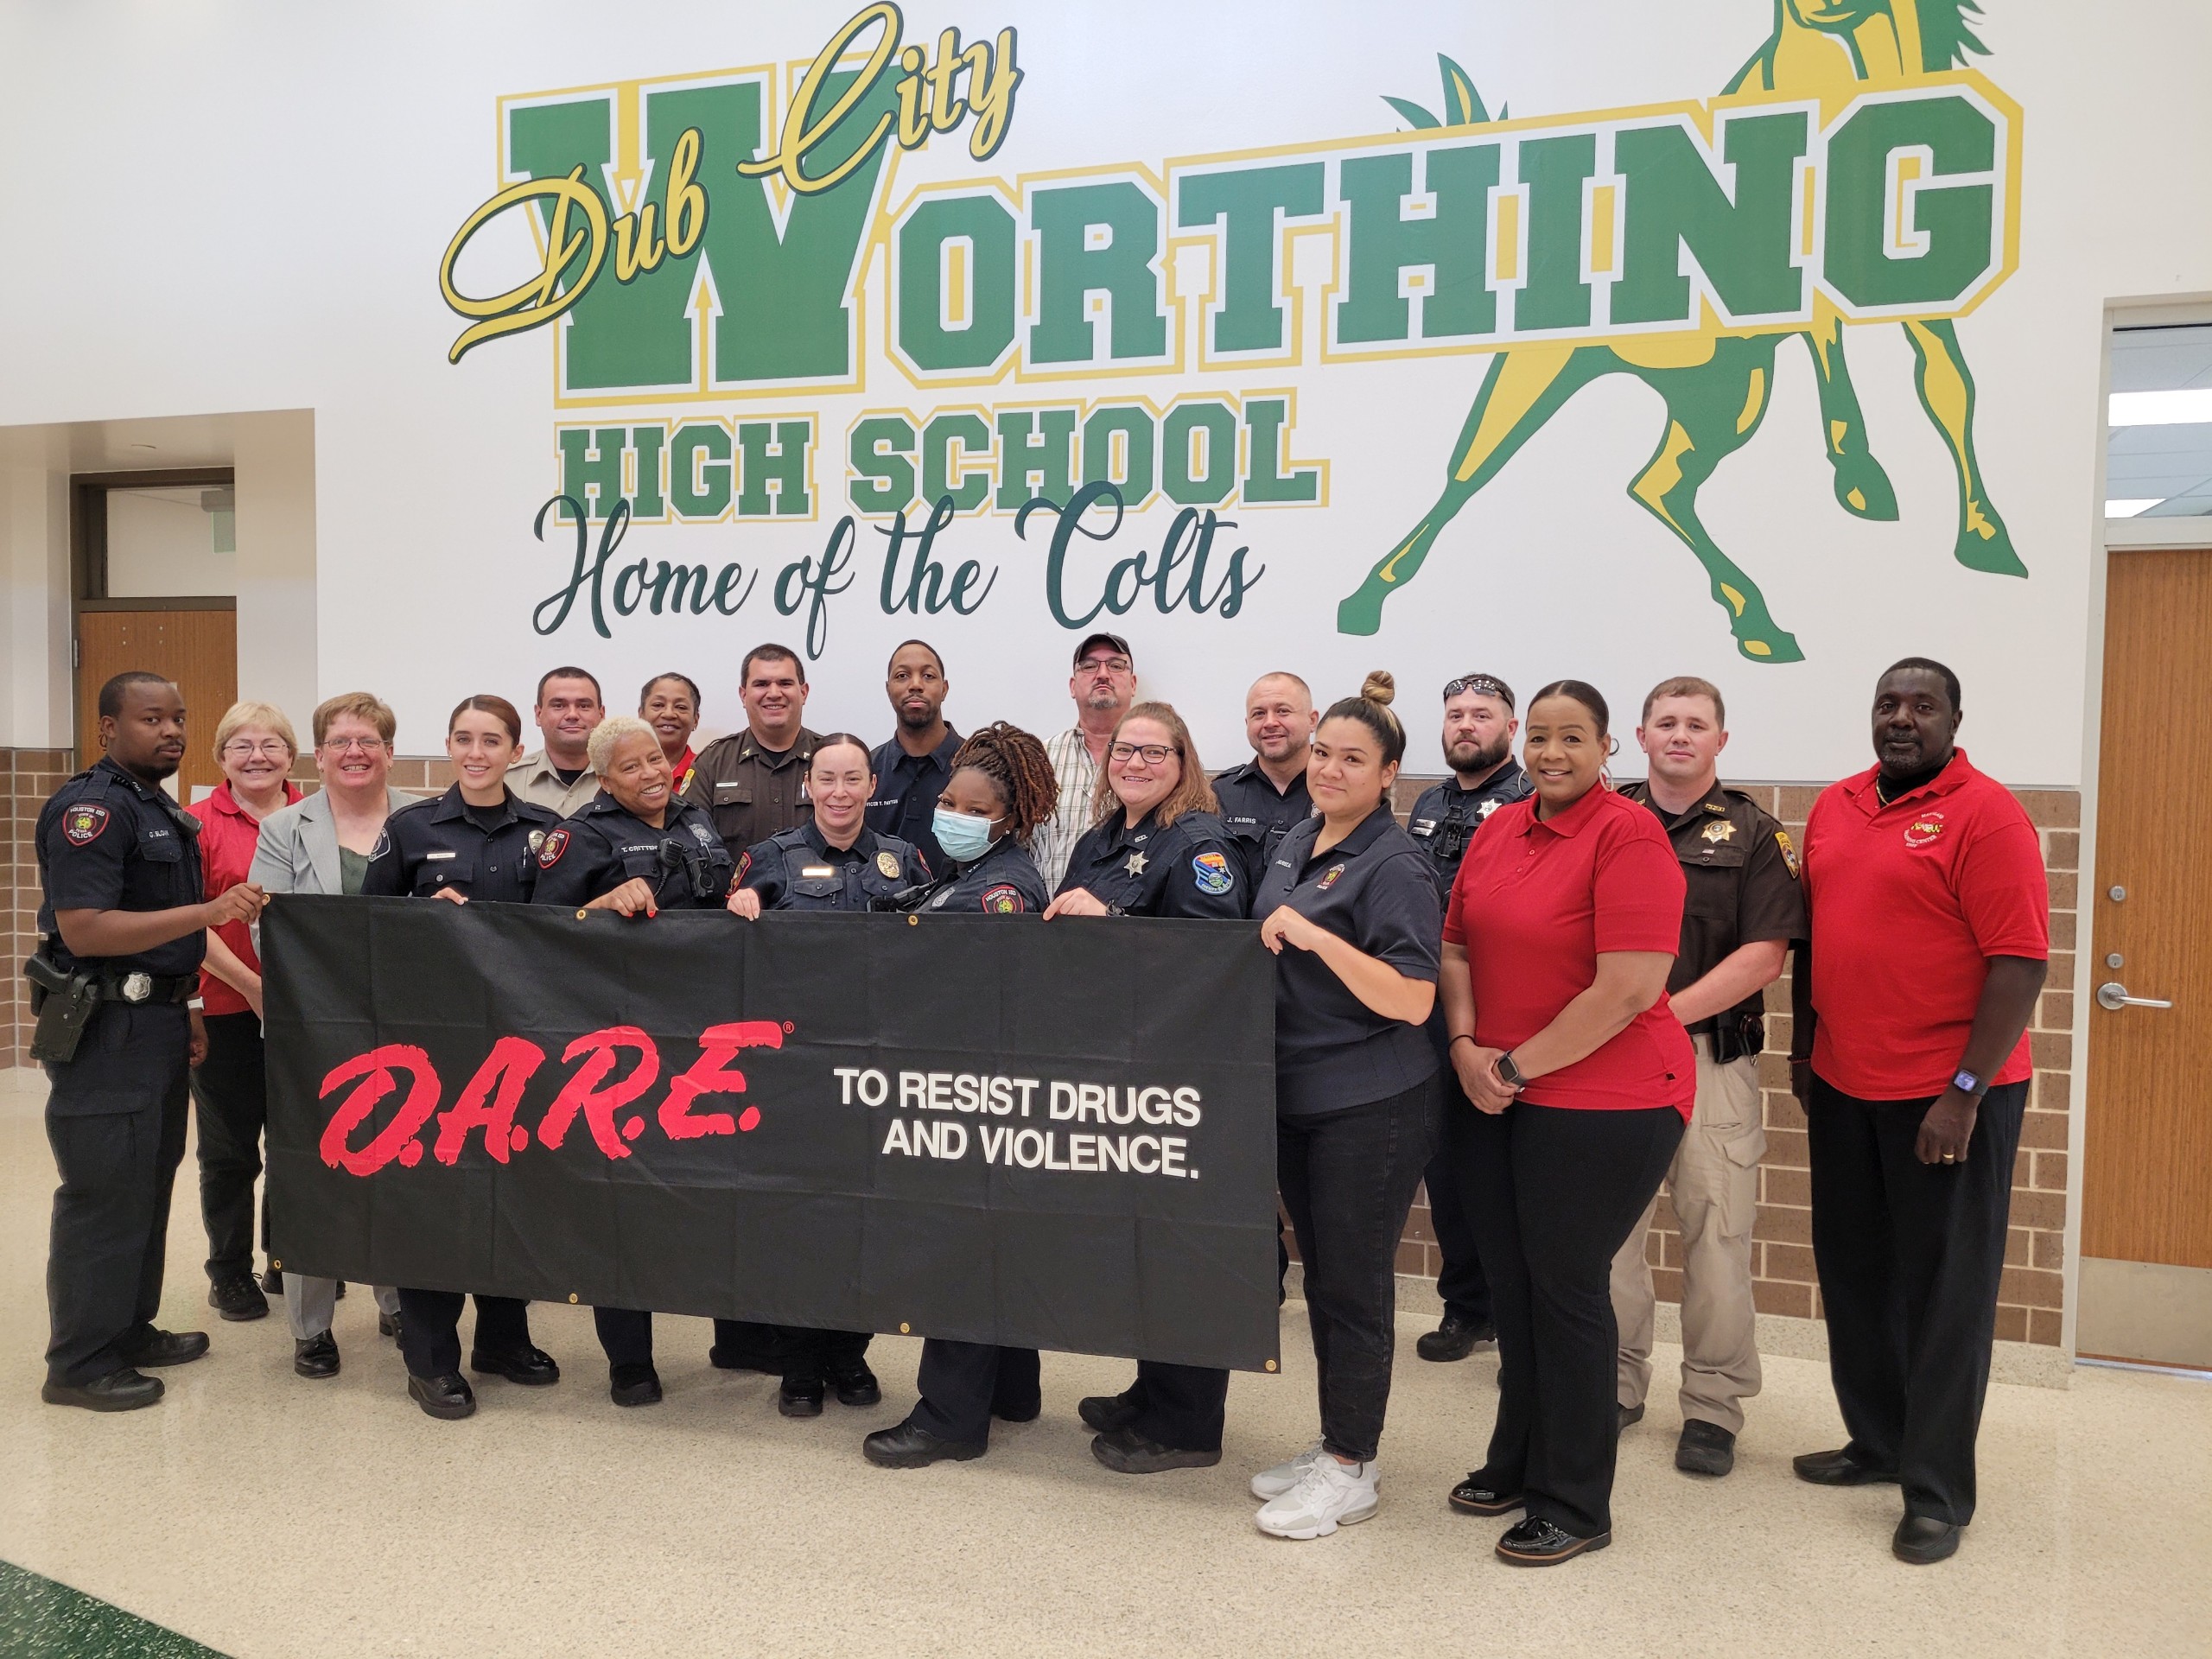 Class Photo from the D.A.R.E. Officer Training held on August 1 – 12, 2022 in Houston, TX